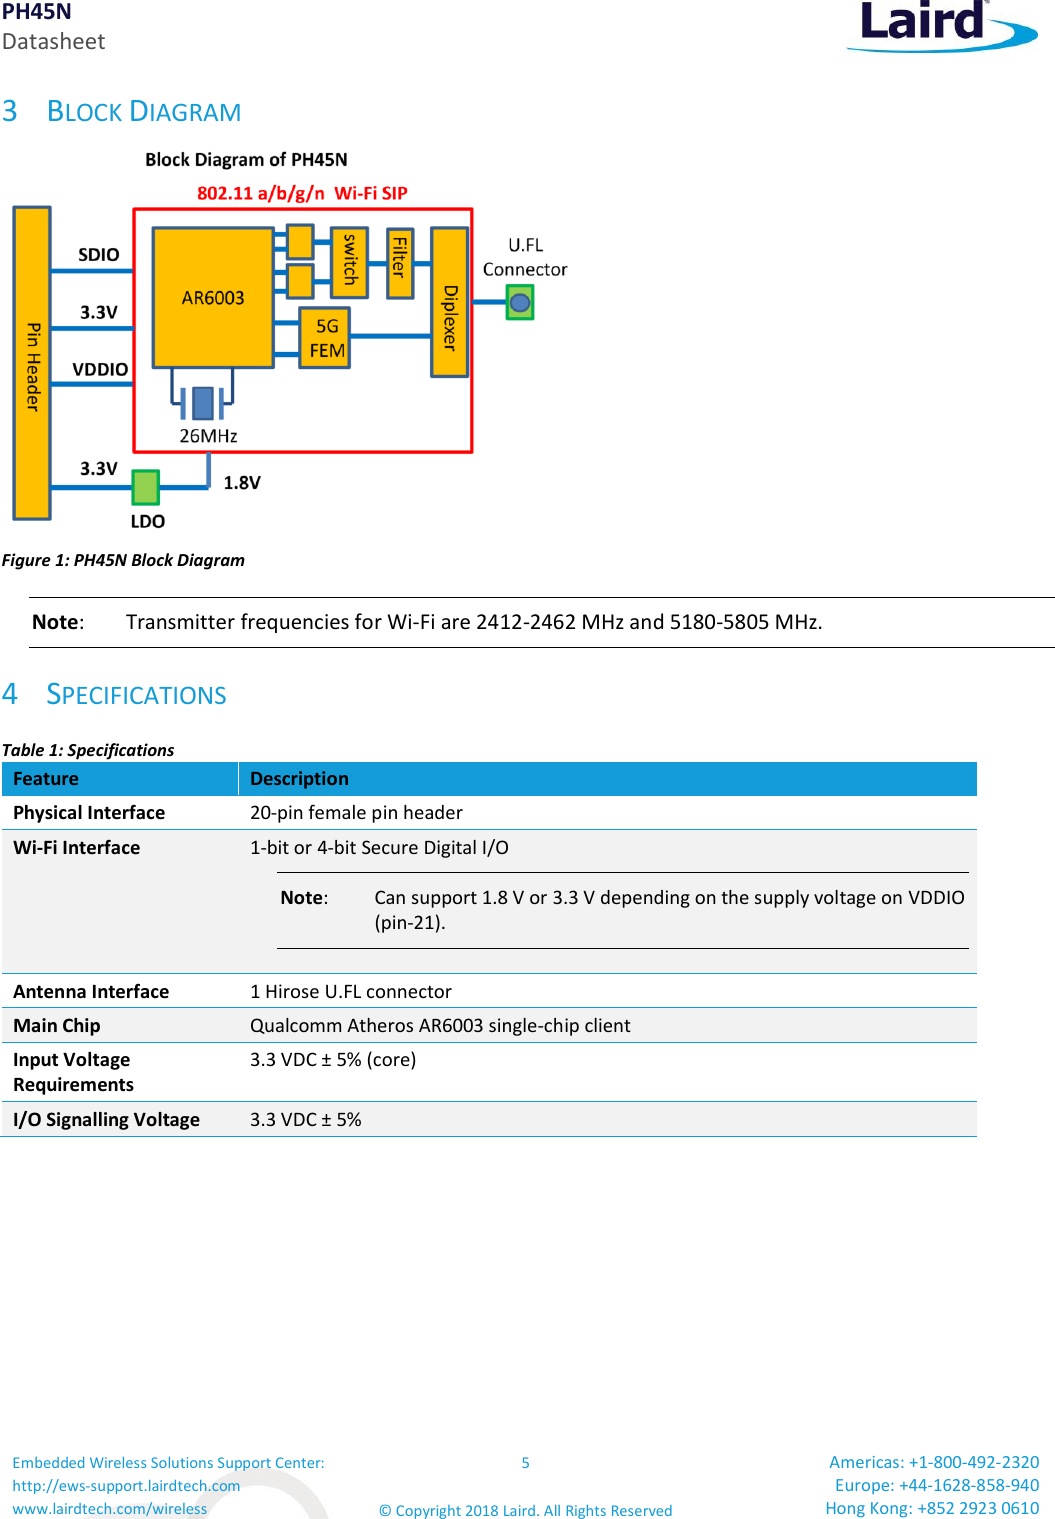 PH45N Datasheet Embedded Wireless Solutions Support Center: http://ews-support.lairdtech.com www.lairdtech.com/wireless 5 © Copyright 2018 Laird. All Rights Reserved Americas: +1-800-492-2320 Europe: +44-1628-858-940 Hong Kong: +852 2923 0610  3 BLOCK DIAGRAM  Figure 1: PH45N Block Diagram Note:   Transmitter frequencies for Wi-Fi are 2412-2462 MHz and 5180-5805 MHz. 4 SPECIFICATIONS Table 1: Specifications Feature Description Physical Interface 20-pin female pin header Wi-Fi Interface 1-bit or 4-bit Secure Digital I/O  Note:   Can support 1.8 V or 3.3 V depending on the supply voltage on VDDIO (pin-21). Antenna Interface 1 Hirose U.FL connector  Main Chip Qualcomm Atheros AR6003 single-chip client  Input Voltage Requirements 3.3 VDC ± 5% (core) I/O Signalling Voltage 3.3 VDC ± 5% 